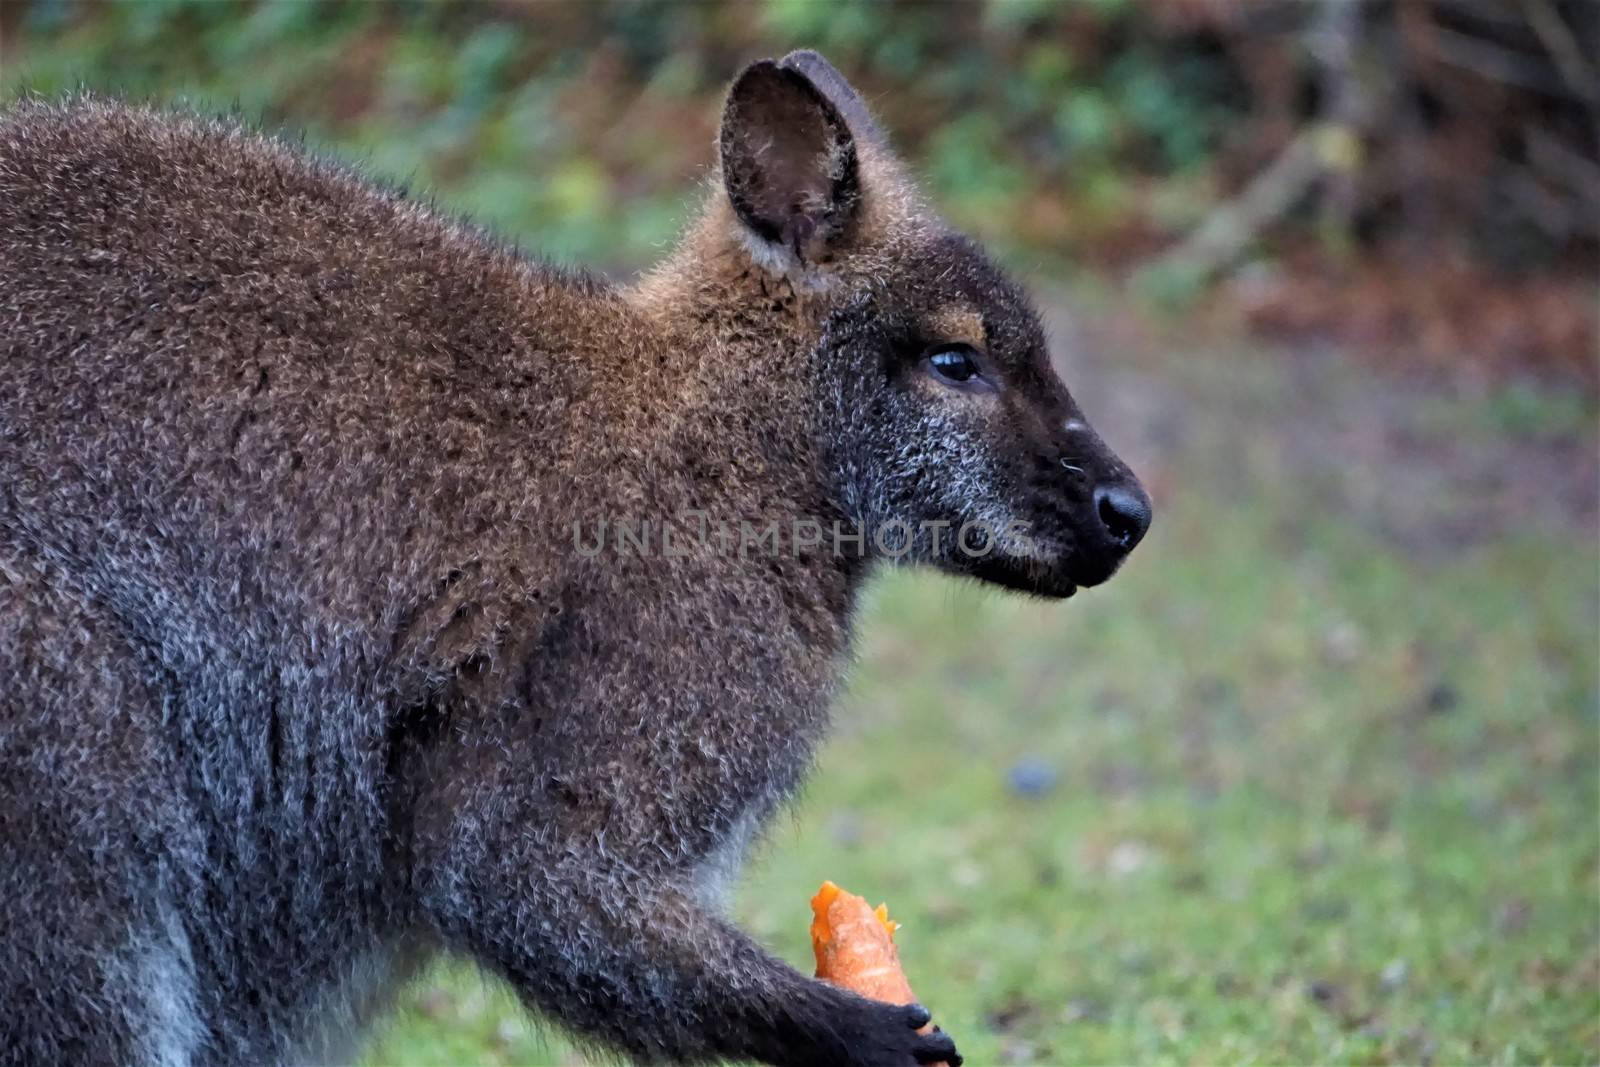 Red-necked wallaby eating a carrot in the zoo by pisces2386